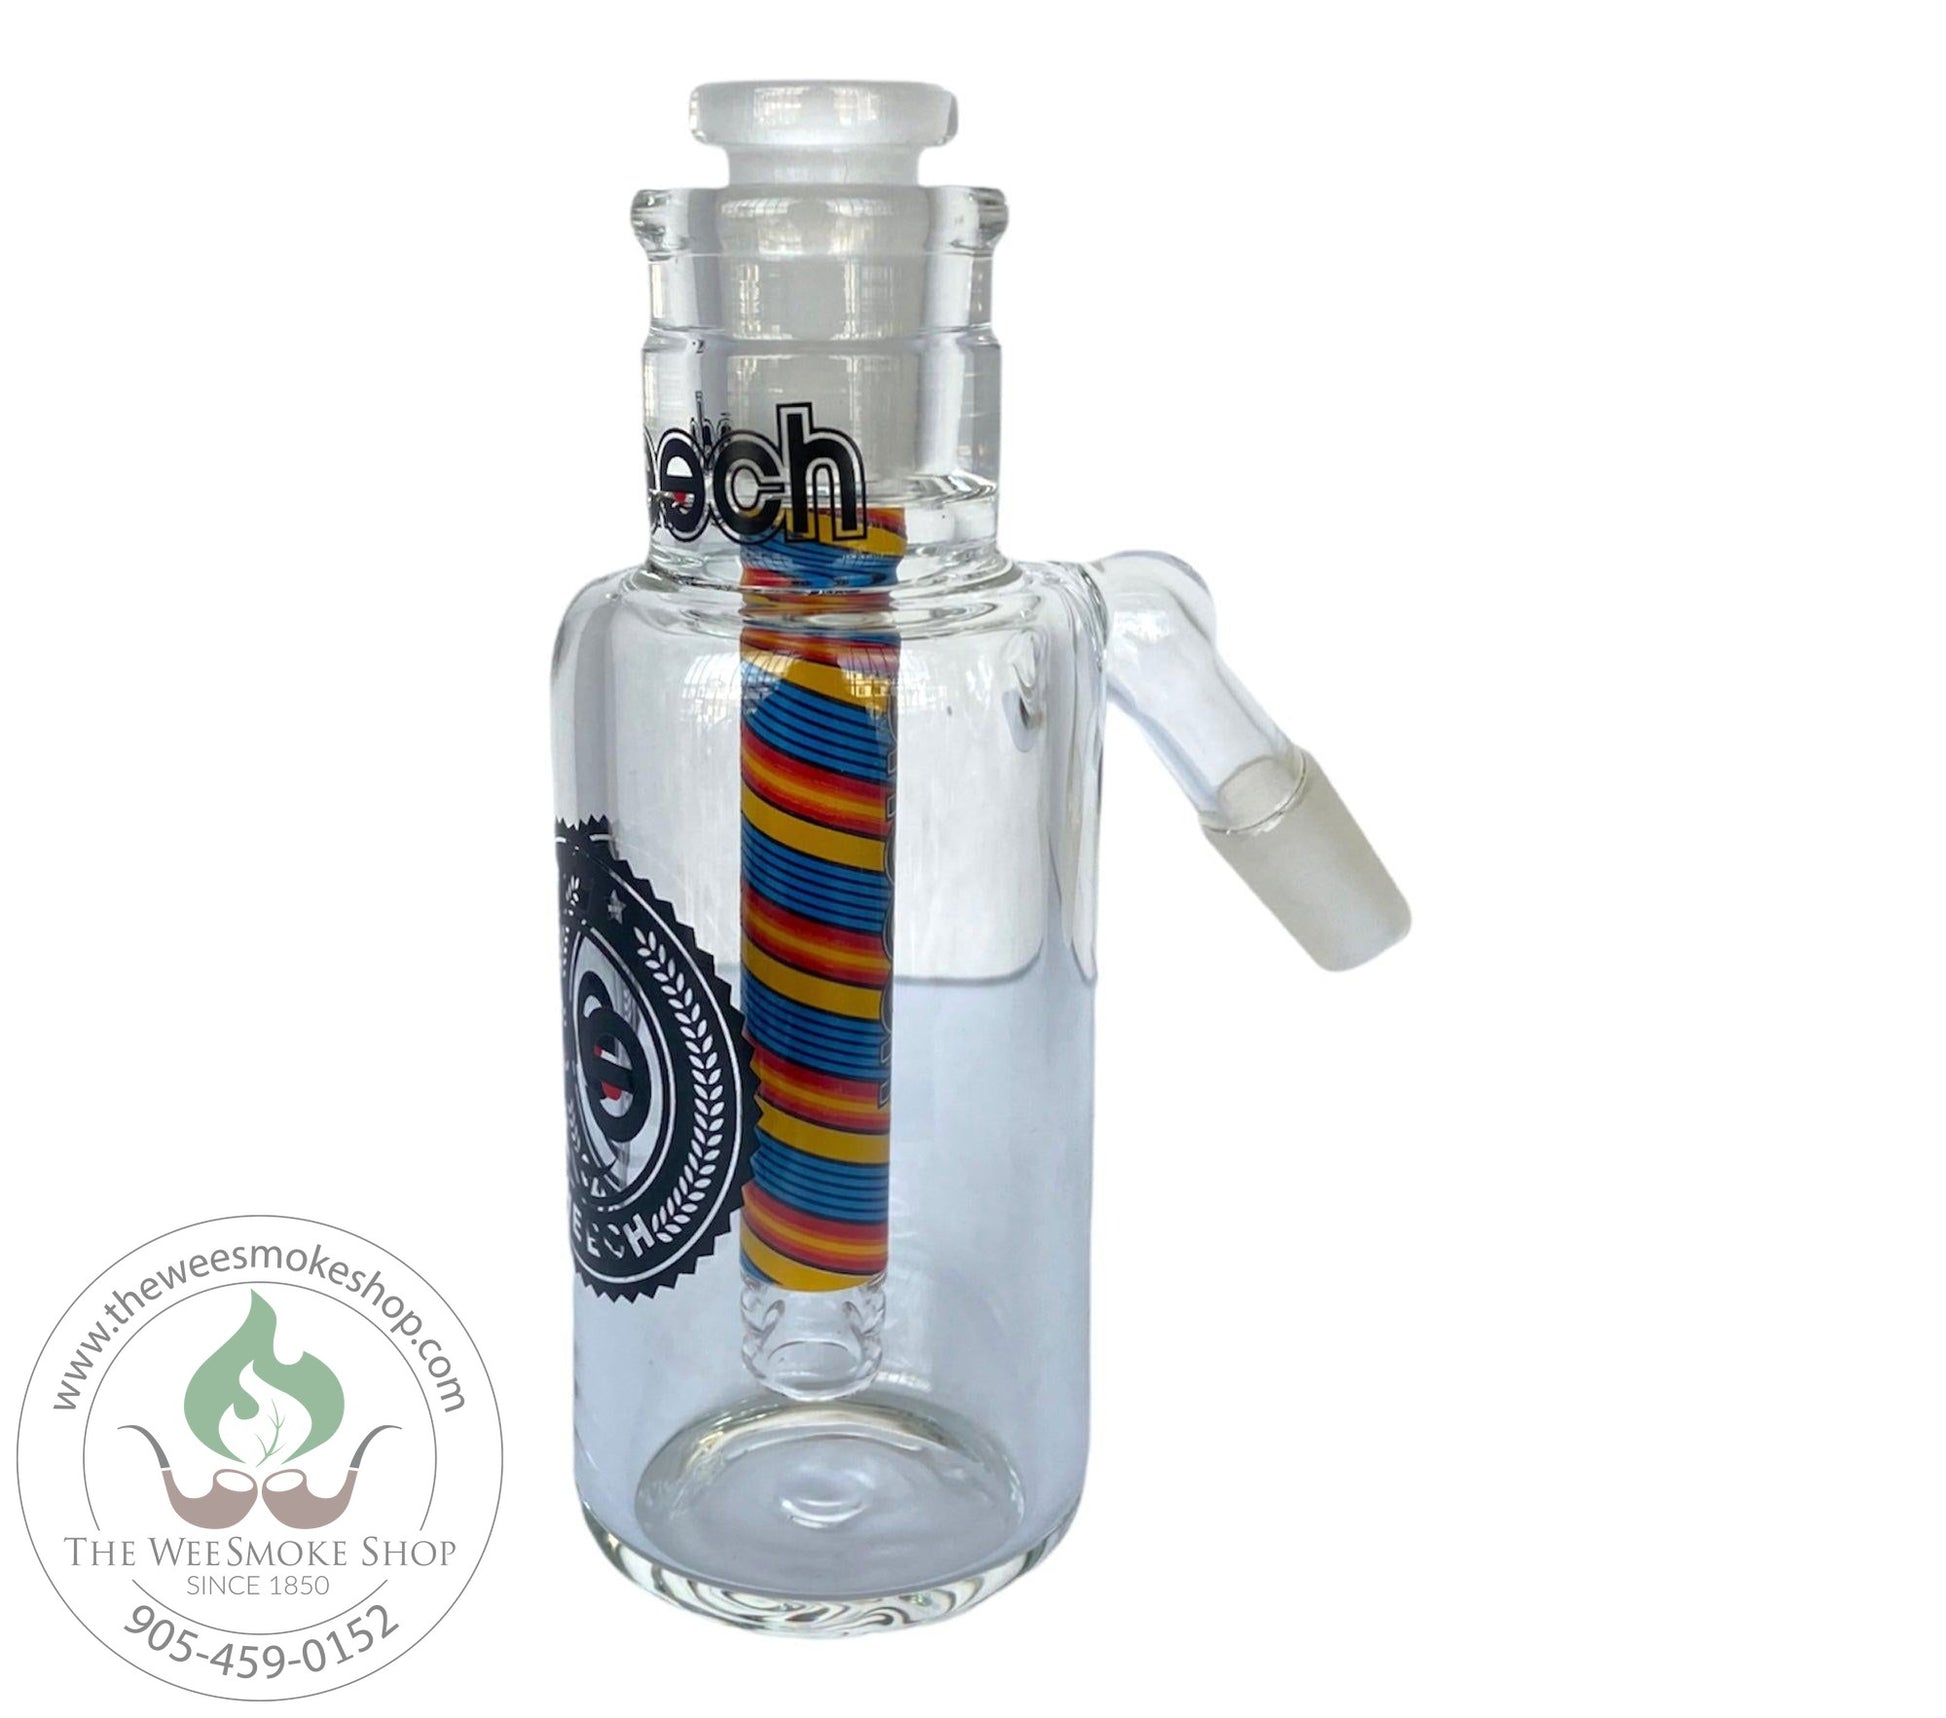 Cheech Ash Catcher with Removable Downstem-Blue and Yellow -Ash Catchers- The Wee Smoke Shop